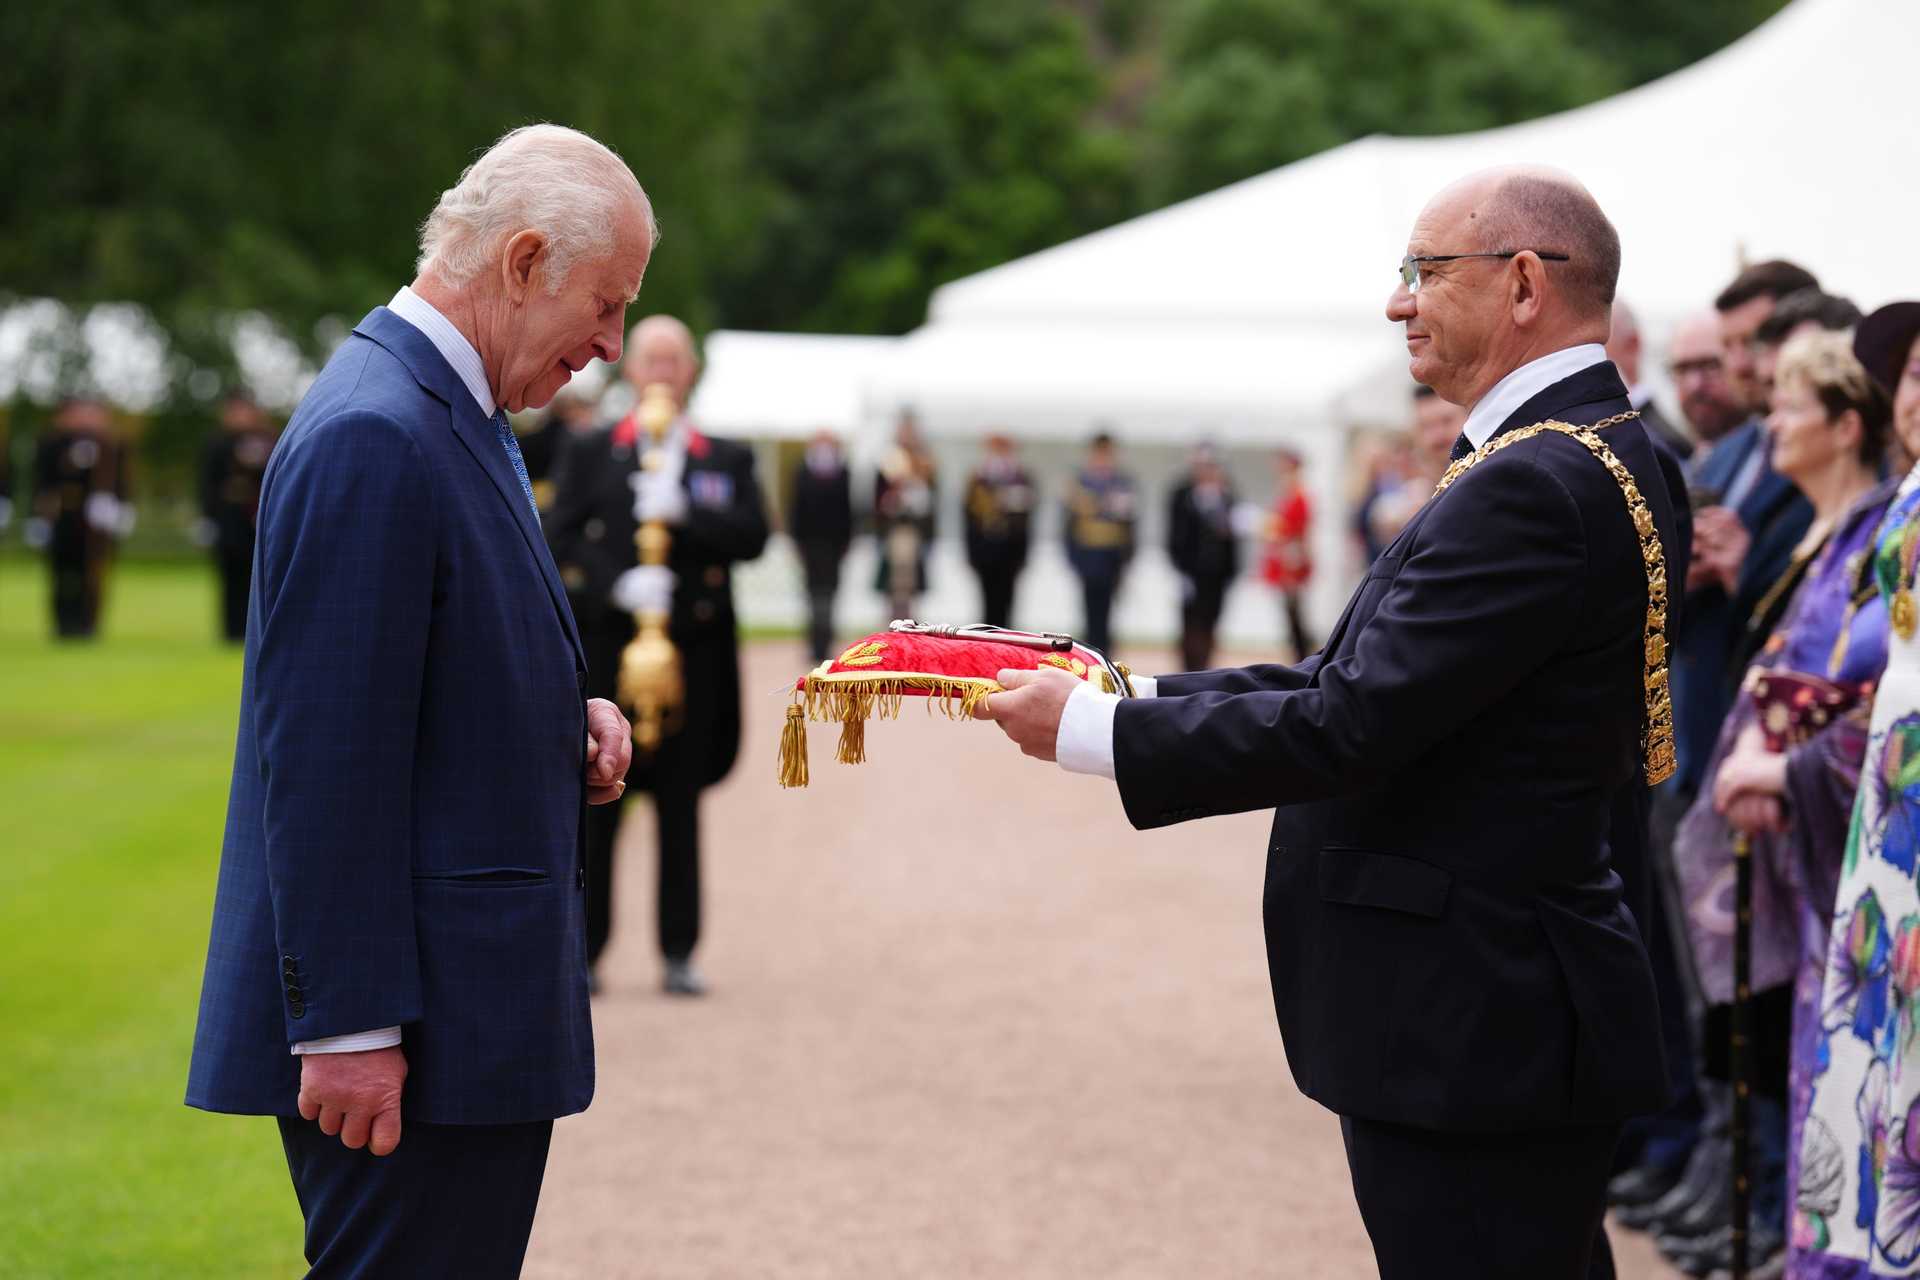 The King receives the keys to the City of Edinburgh from Lord Provost Robert Aldridge at the Palace of Holyroodhouse (Andrew Milligan/PA) 